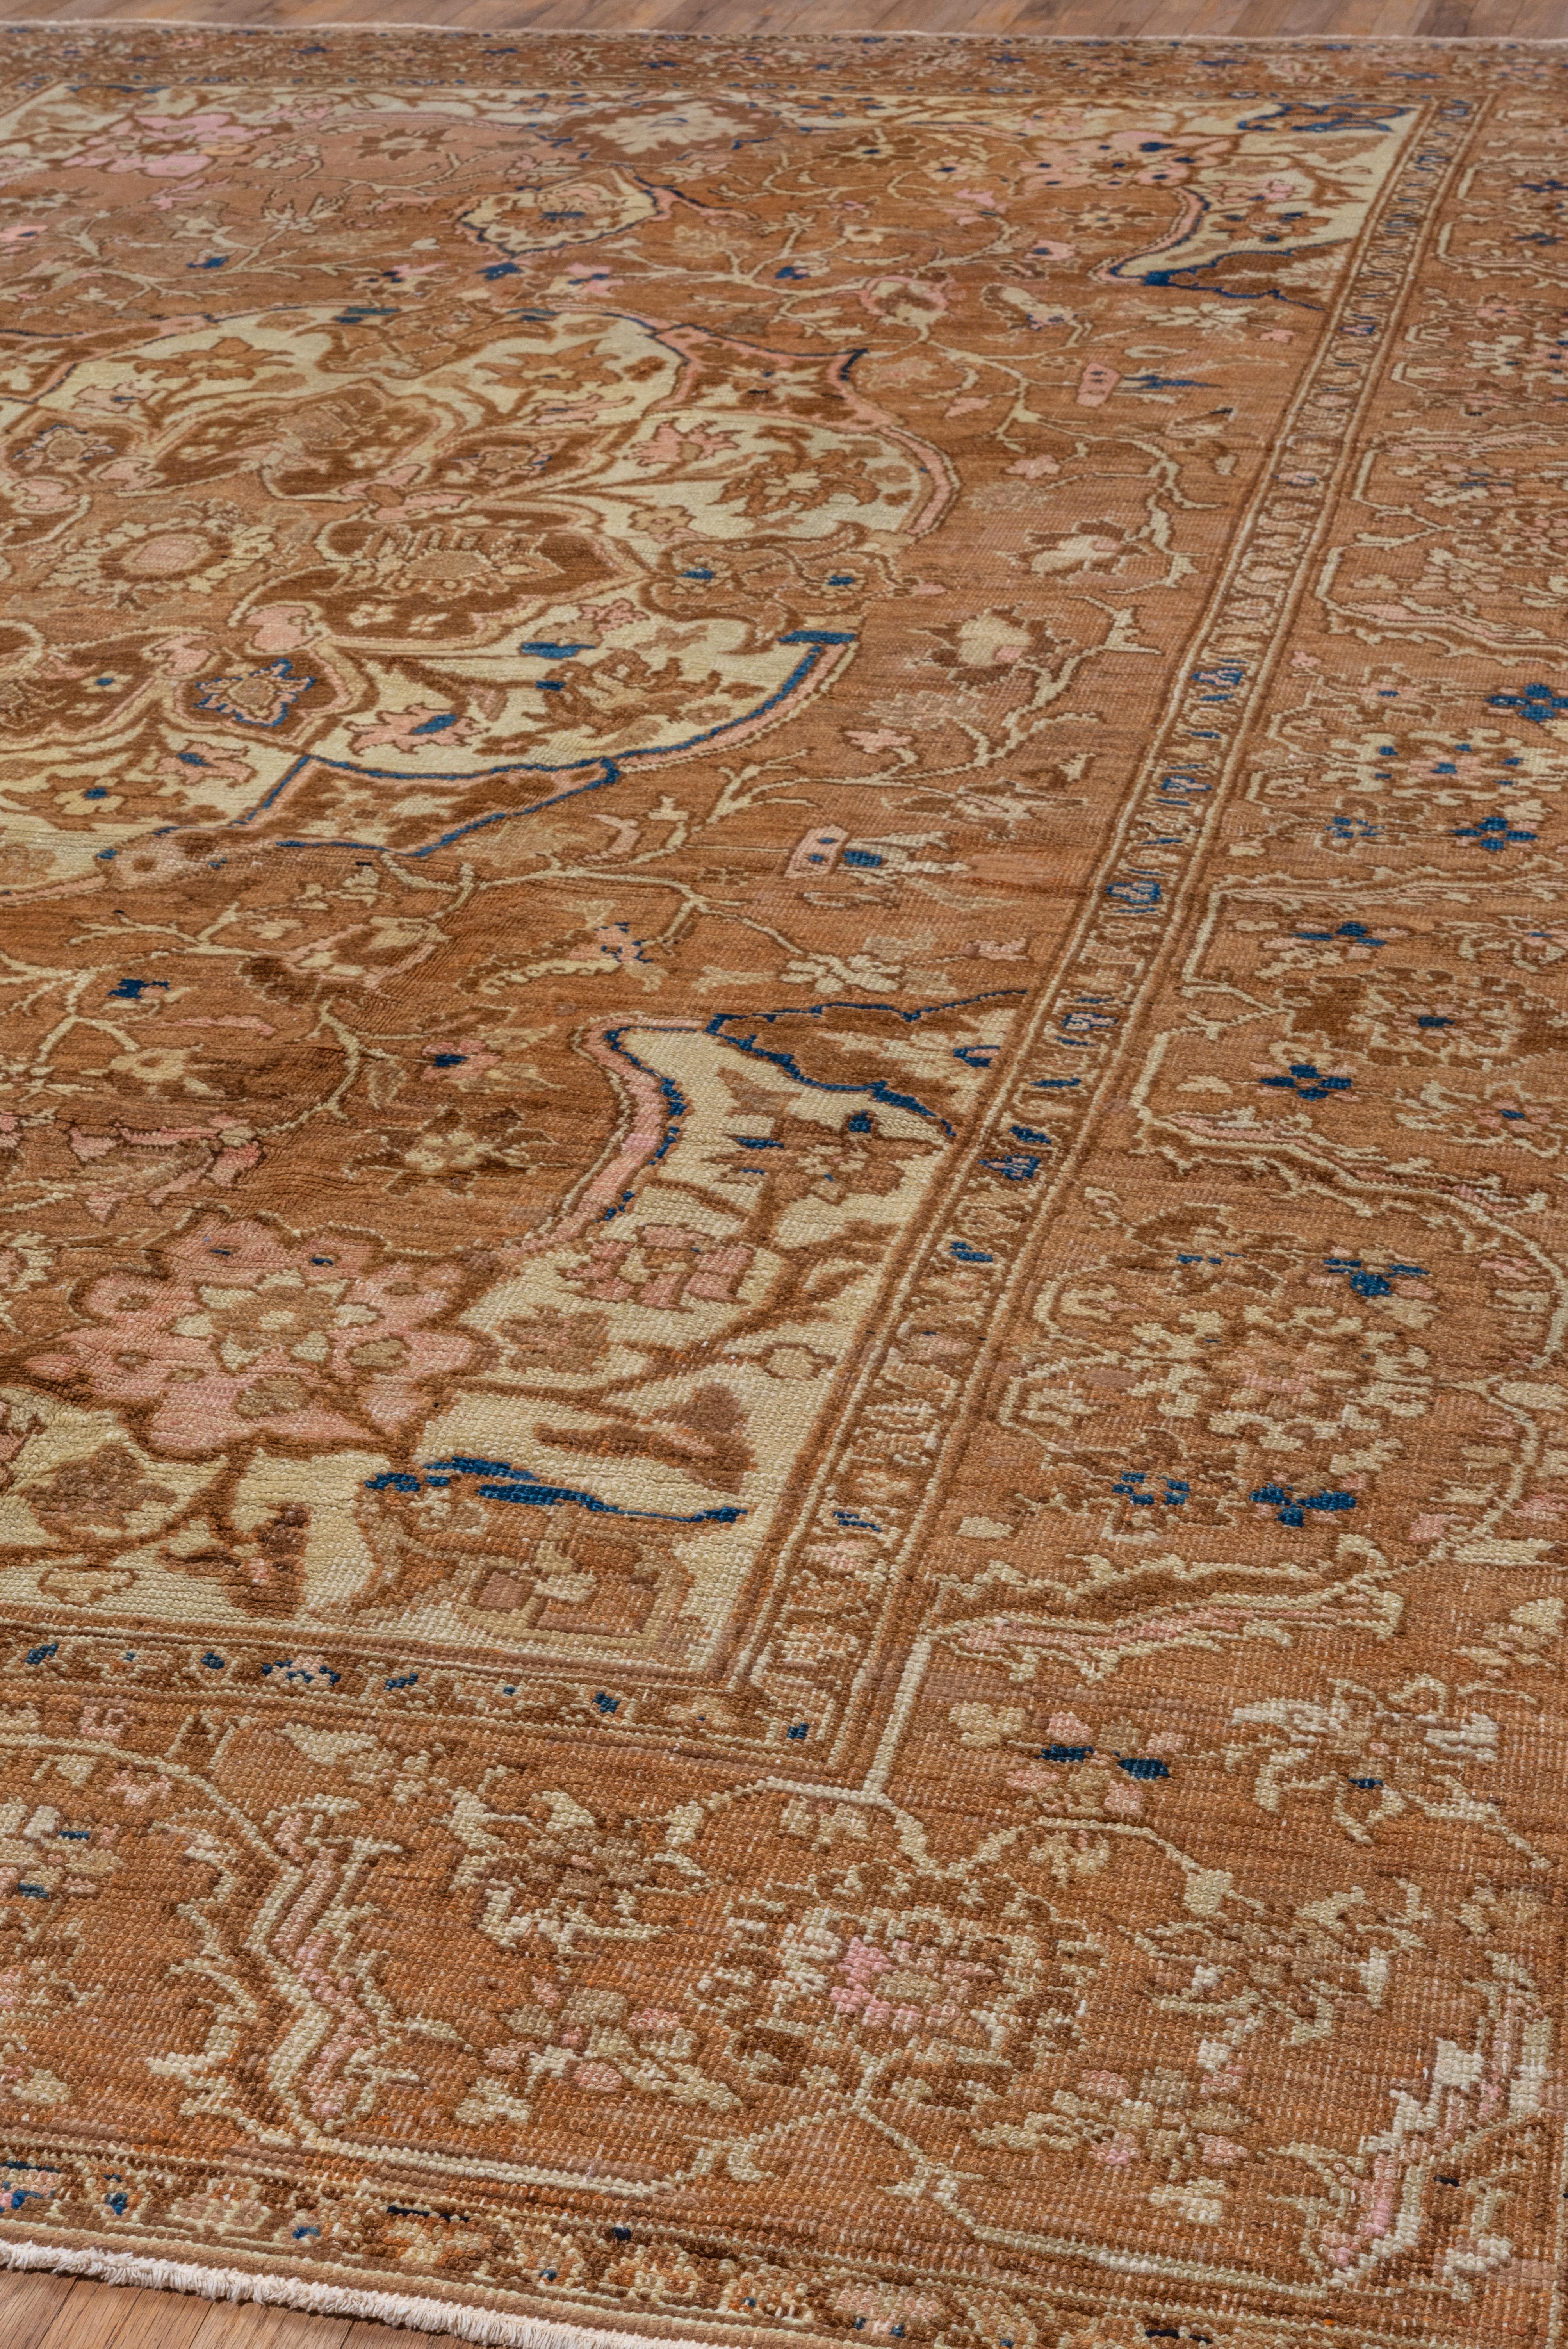 Antique Persian Heriz Serapi Rug, Tan Field with Blue & Pink Accents, Circa 1910 In Good Condition For Sale In New York, NY